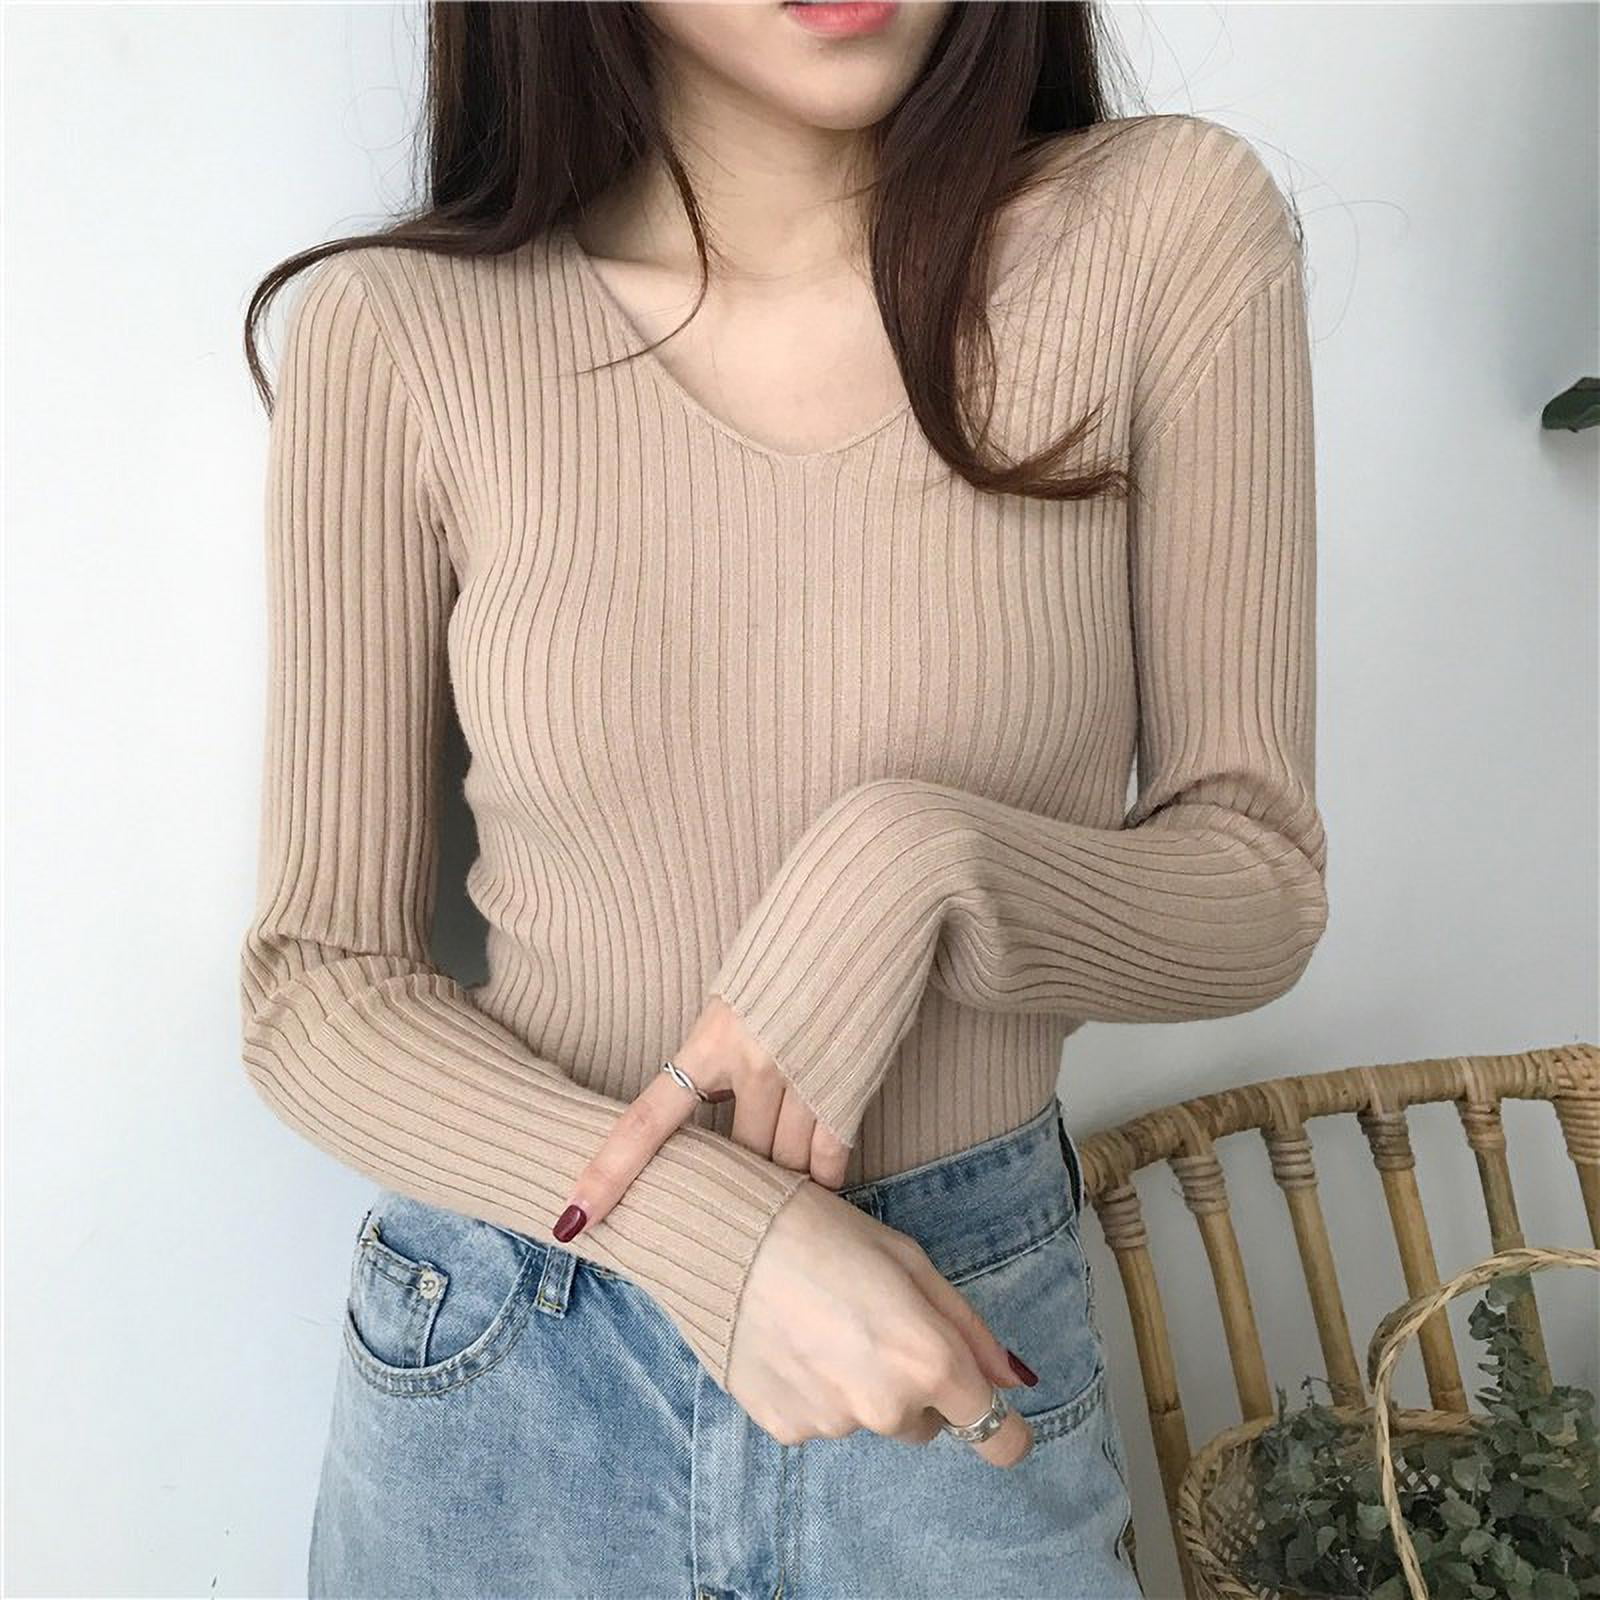 Mens Long Sleeves Slim V-neck Outwear Fashion Style Casual Knitted Sweater B578 